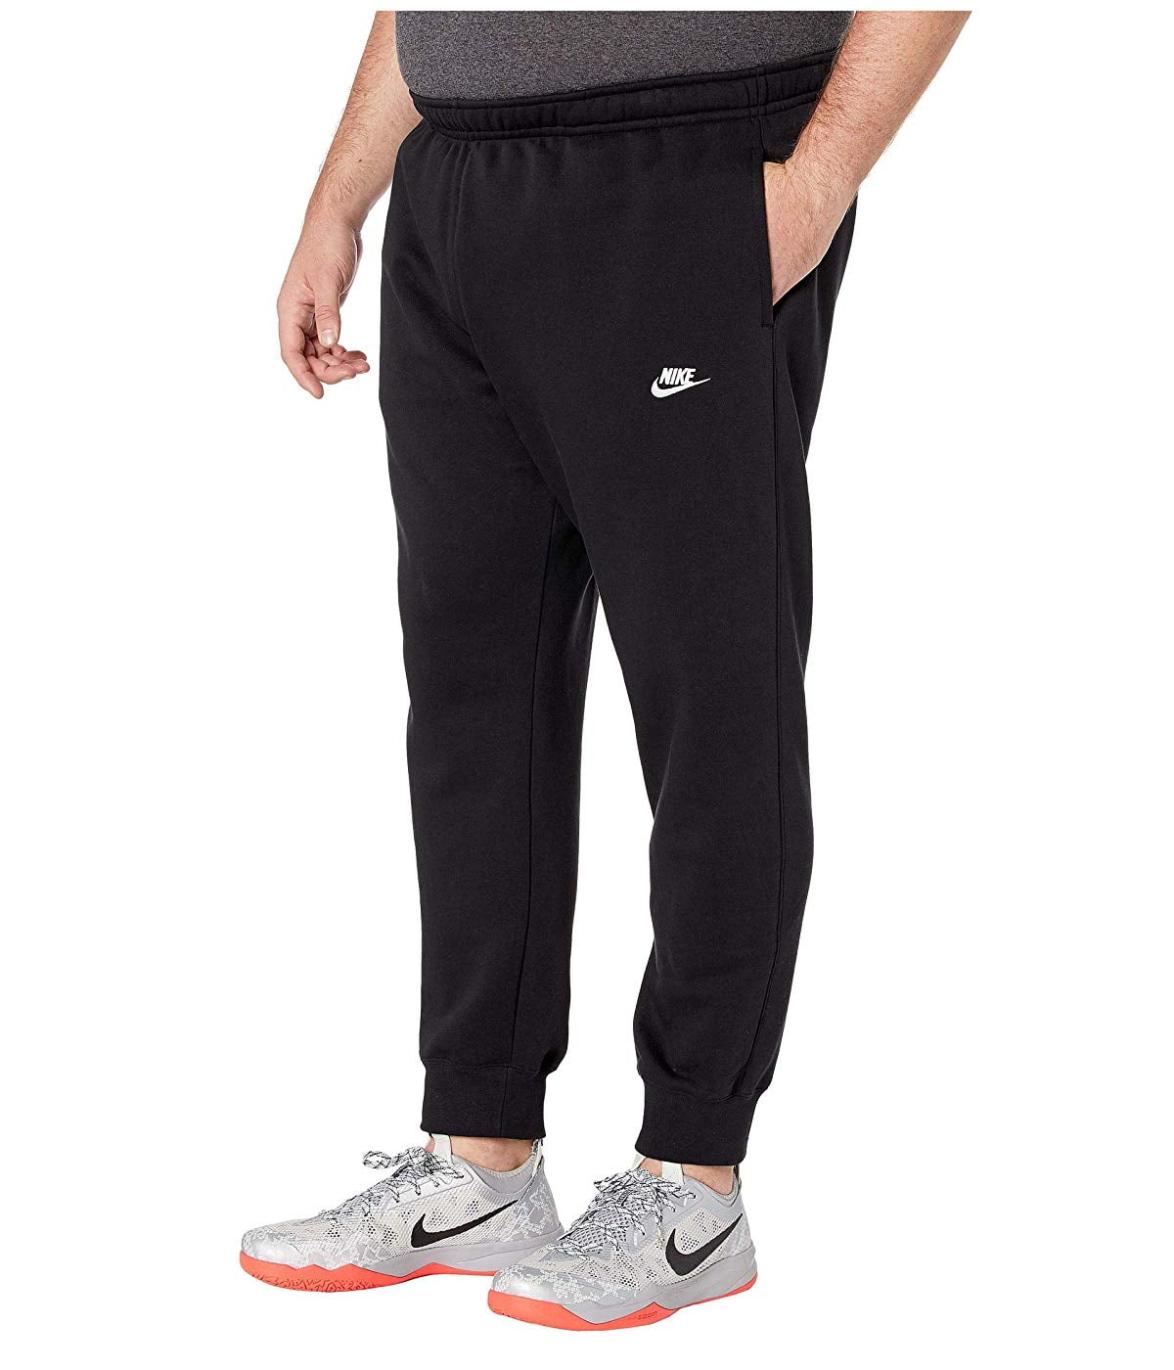 How Can I Care for My Activewear Fashion Sportswear?